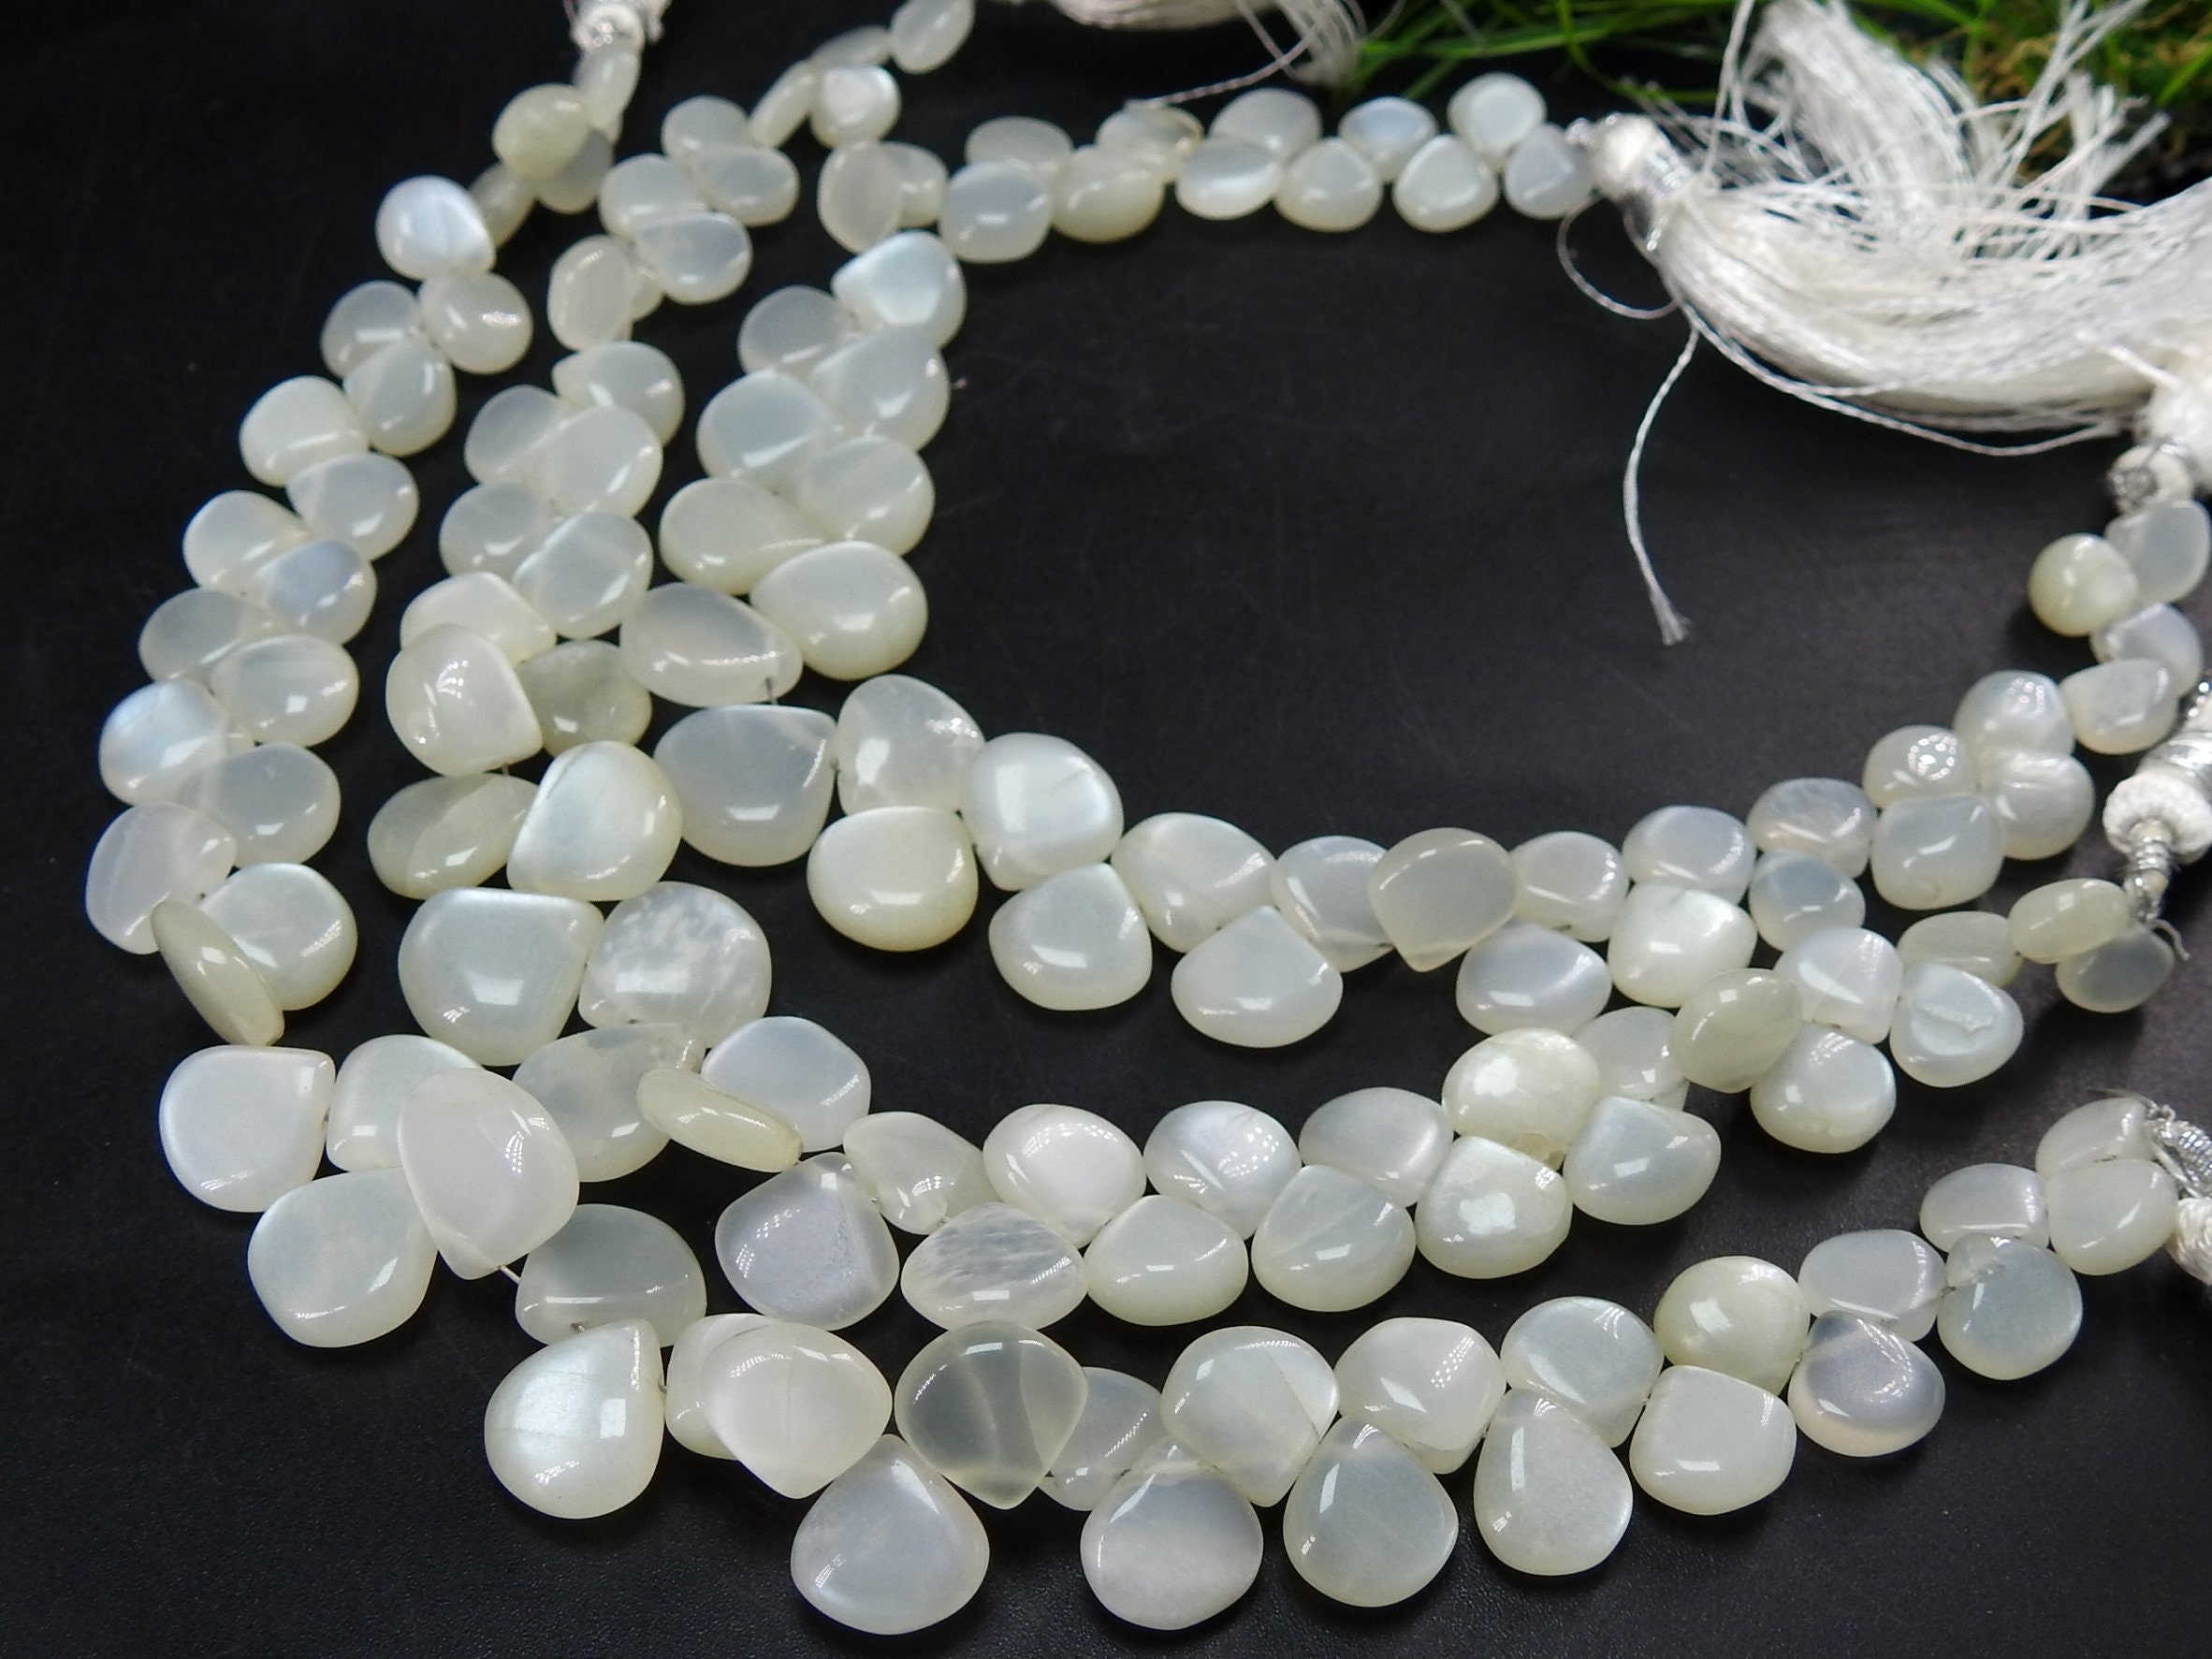 White Moonstone Smooth Heart,Teardrop,Drop,Loose Stone,Handmade Bead,For Making Jewelry,Wholesaler,Supplies 8Inch 6X12MM Approx (pme)BR2 | Save 33% - Rajasthan Living 21